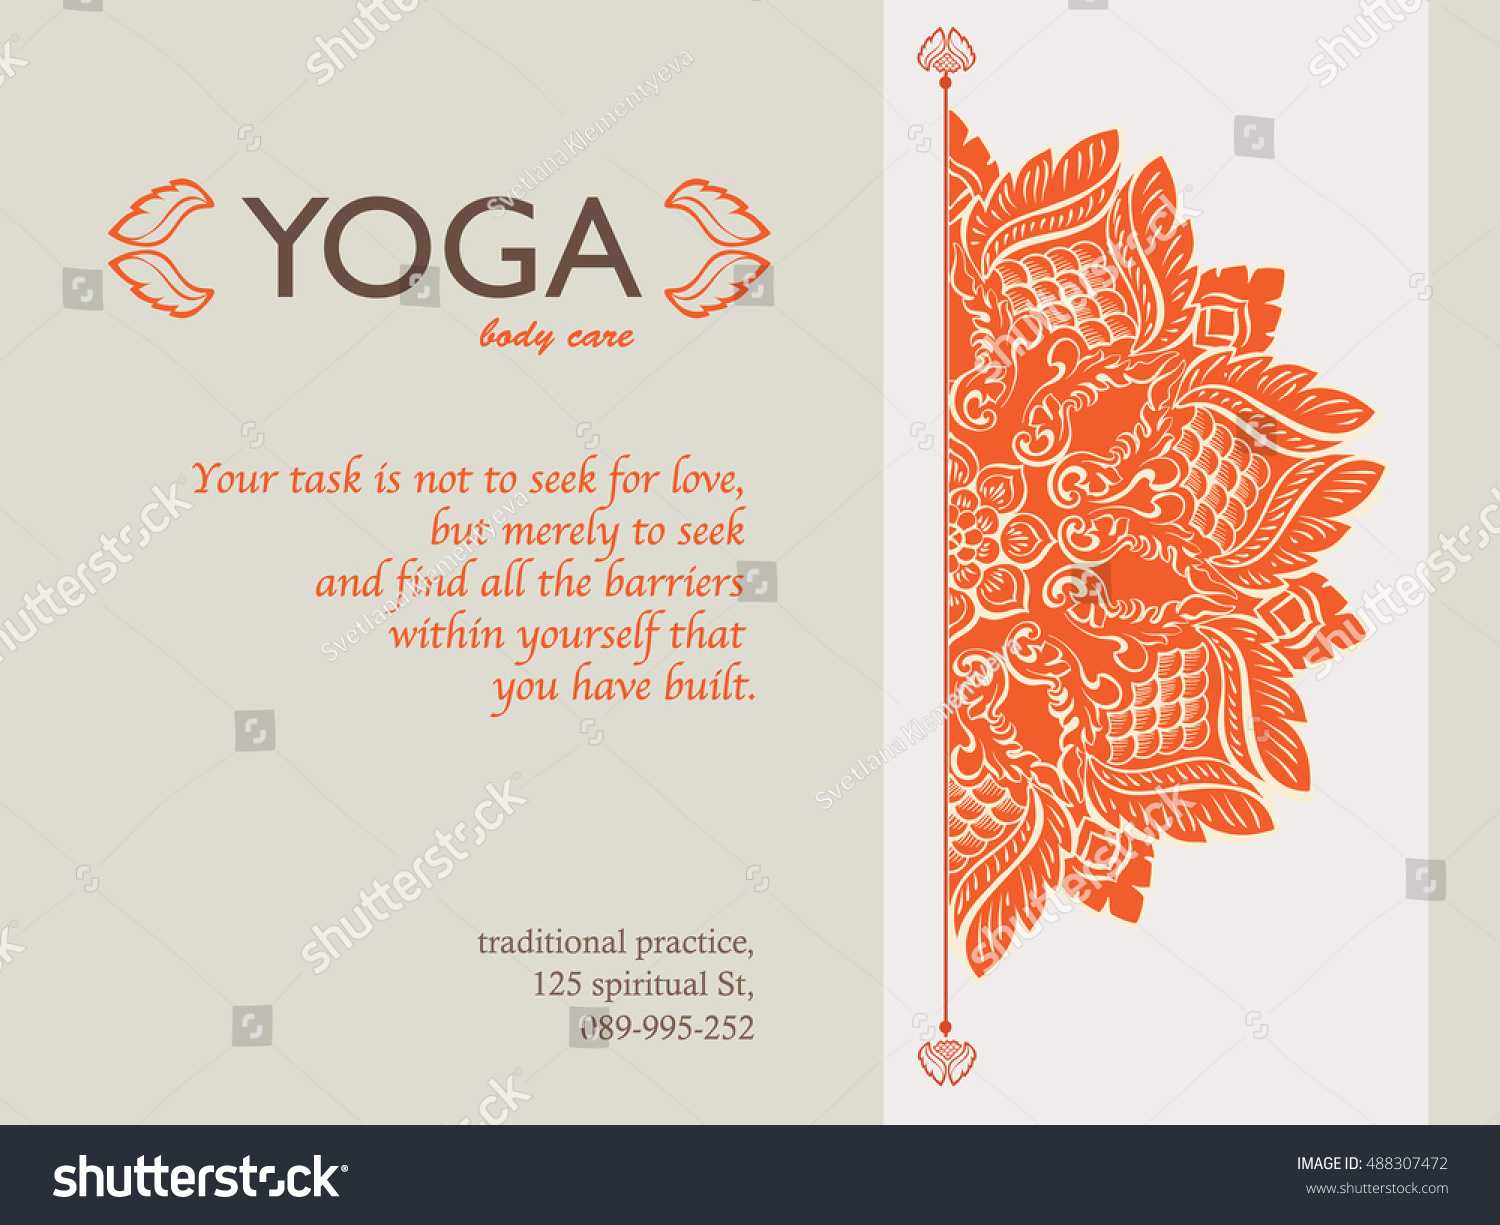 Yoga Gift Certificate Templates | Gift Certificate Templates With Regard To Yoga Gift Certificate Template Free